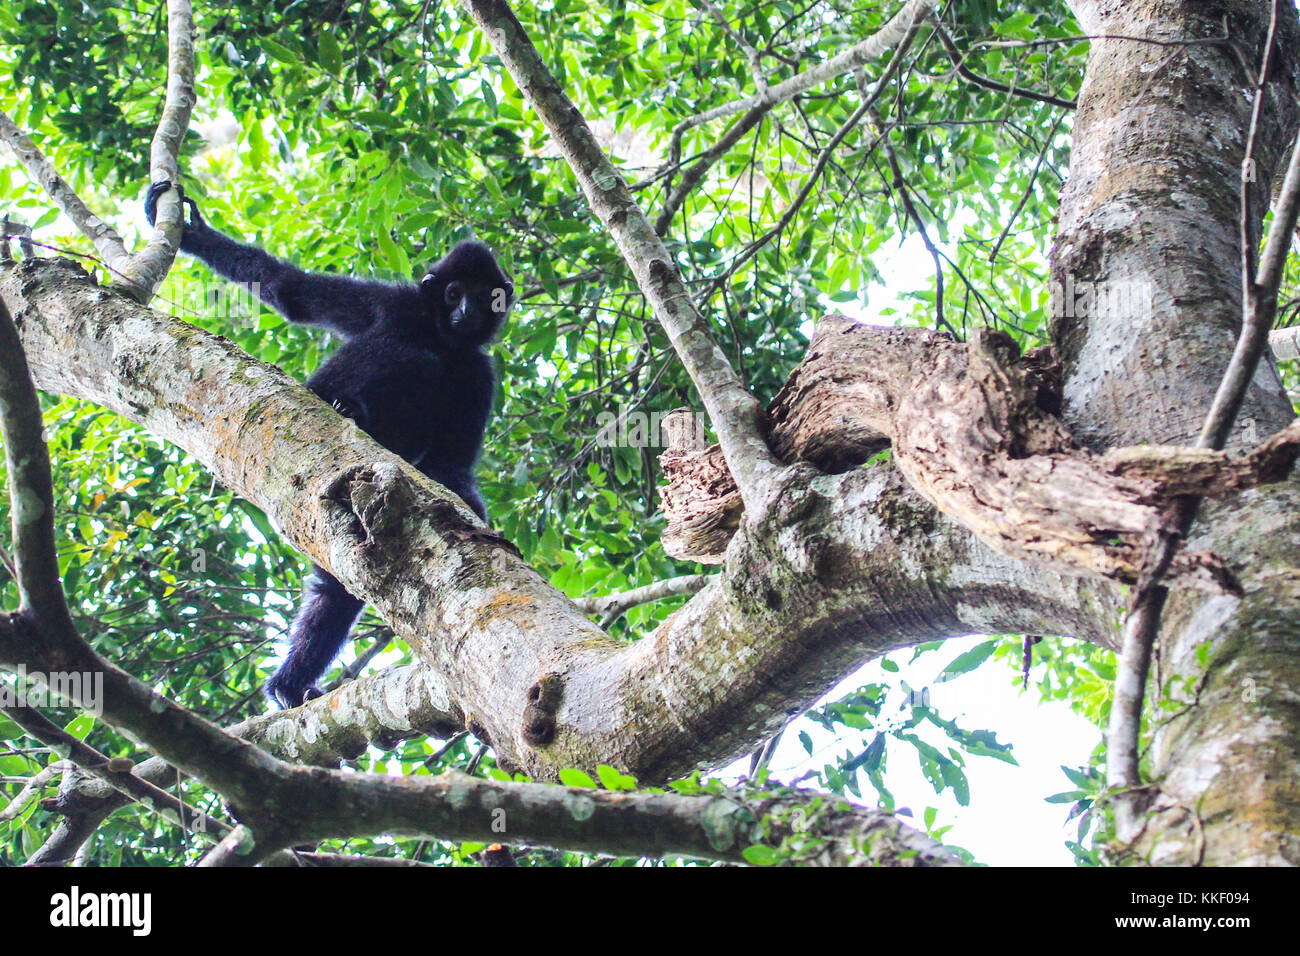 (171202) -- HAIKOU, Dec. 2, 2017 (Xinhua) -- Photo taken on Oct. 27, 2017 shows a Hainan gibbon on a tree at the Bawangling National Nature Reserve in Changjiang, south China's Hainan Province. The Hainan gibbon, or Nomascus Hainanus, is the world's rarest primate, and probably rarest mammal species. Once numbered around 2,000 in the 1950s, they underwent a sharp decline in the late 20th century largely due to habitat loss and hunting. Typically living in rainforest trees over 10 meters tall, the Hainan black crested gibbon (Nomascus hainanus), with long arms and legs but no tail, rarely sets Stock Photo